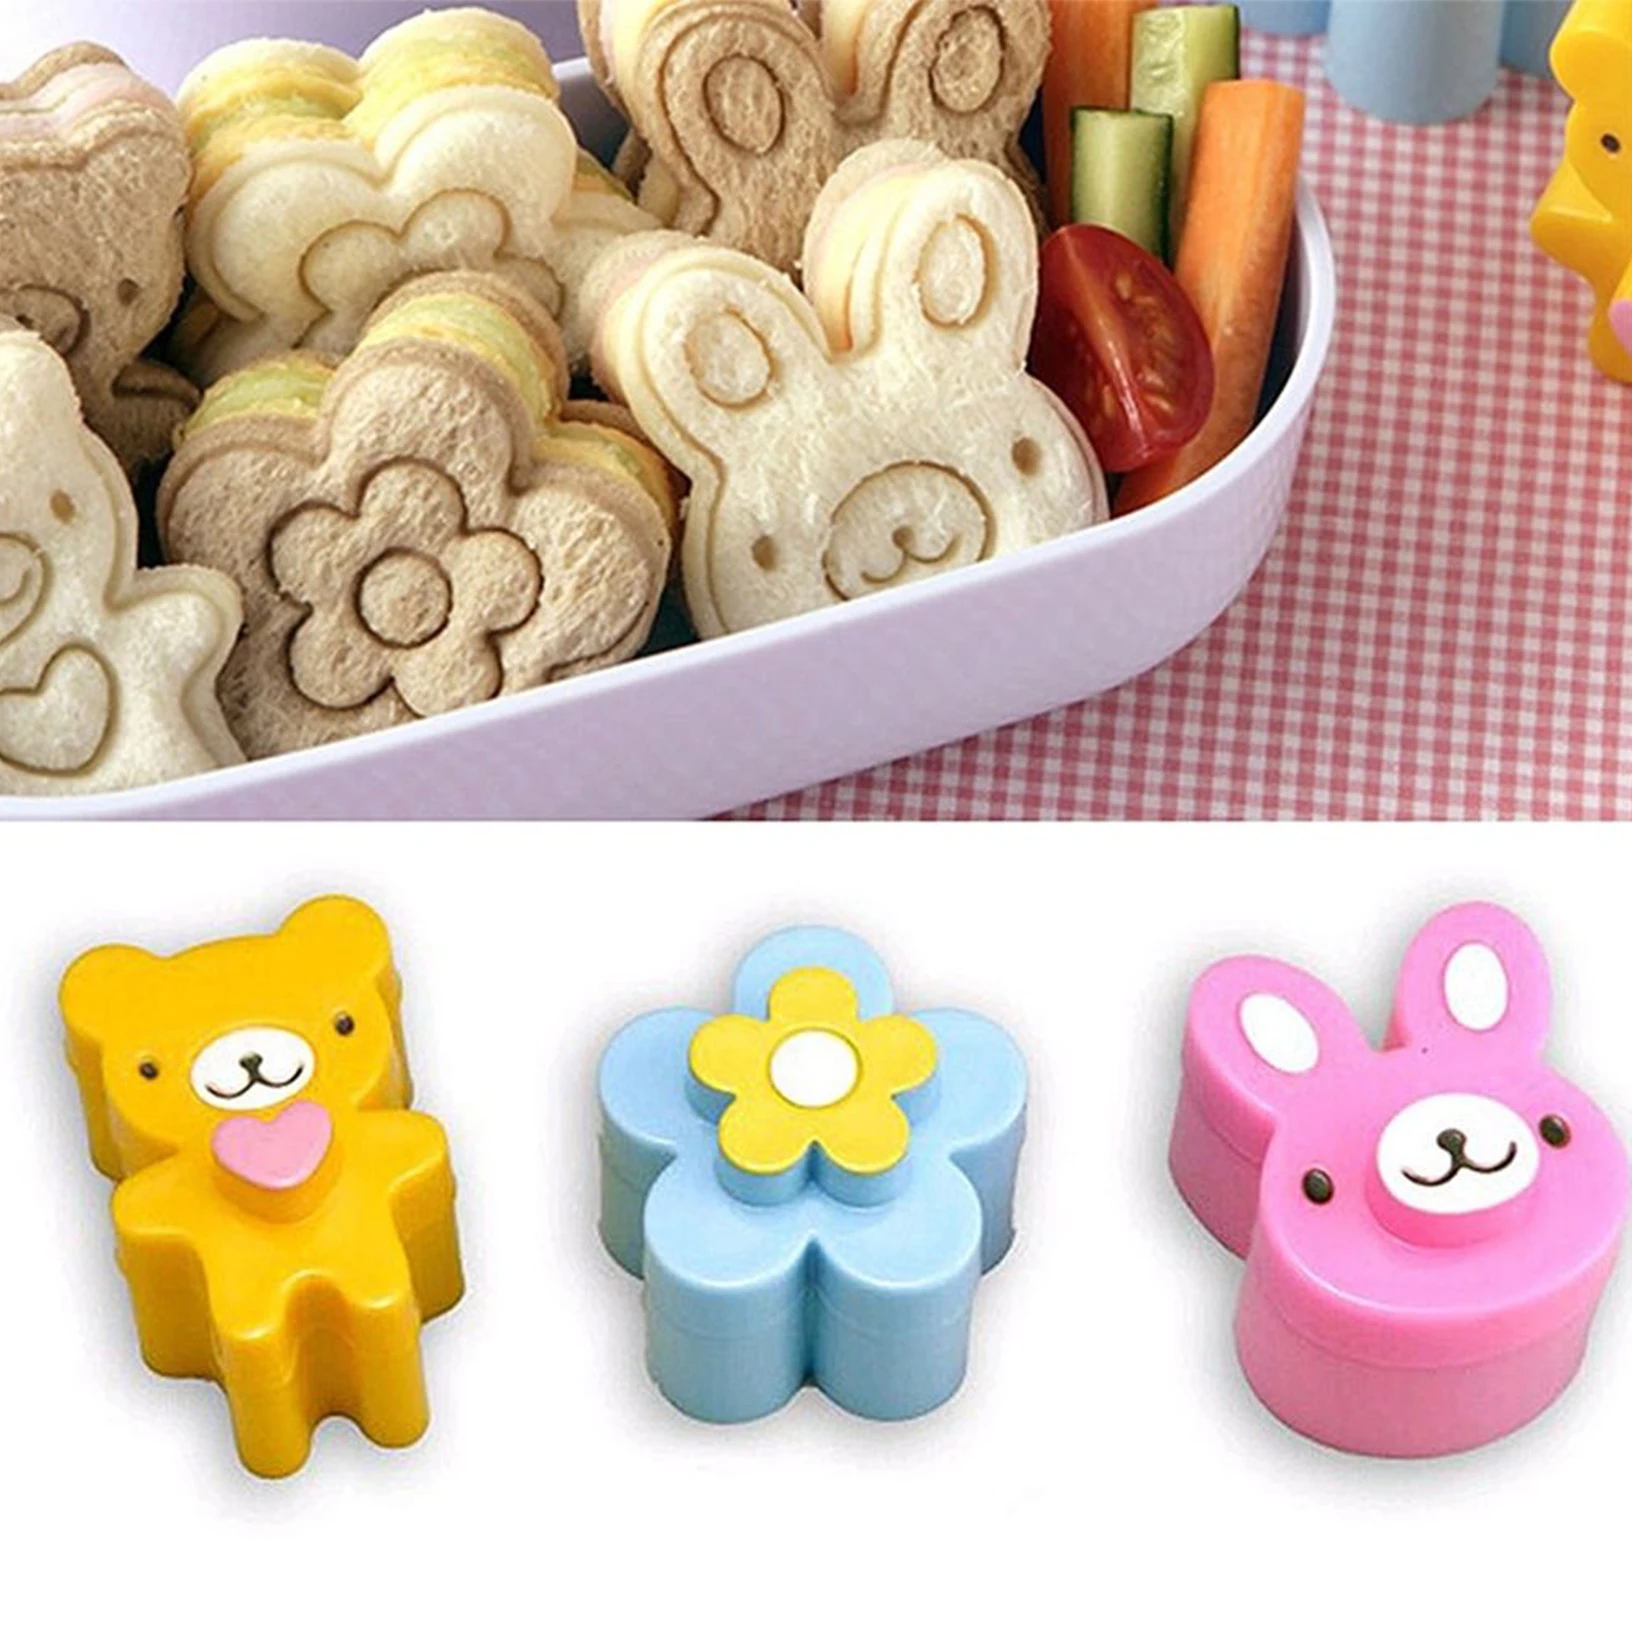 

3pcs/set Bear Flower Rabbit Sandwich Mold Cutter Bread Biscuits Embossed Device Cake Tools Rice Balls Lunch Mould Kitchen Tools